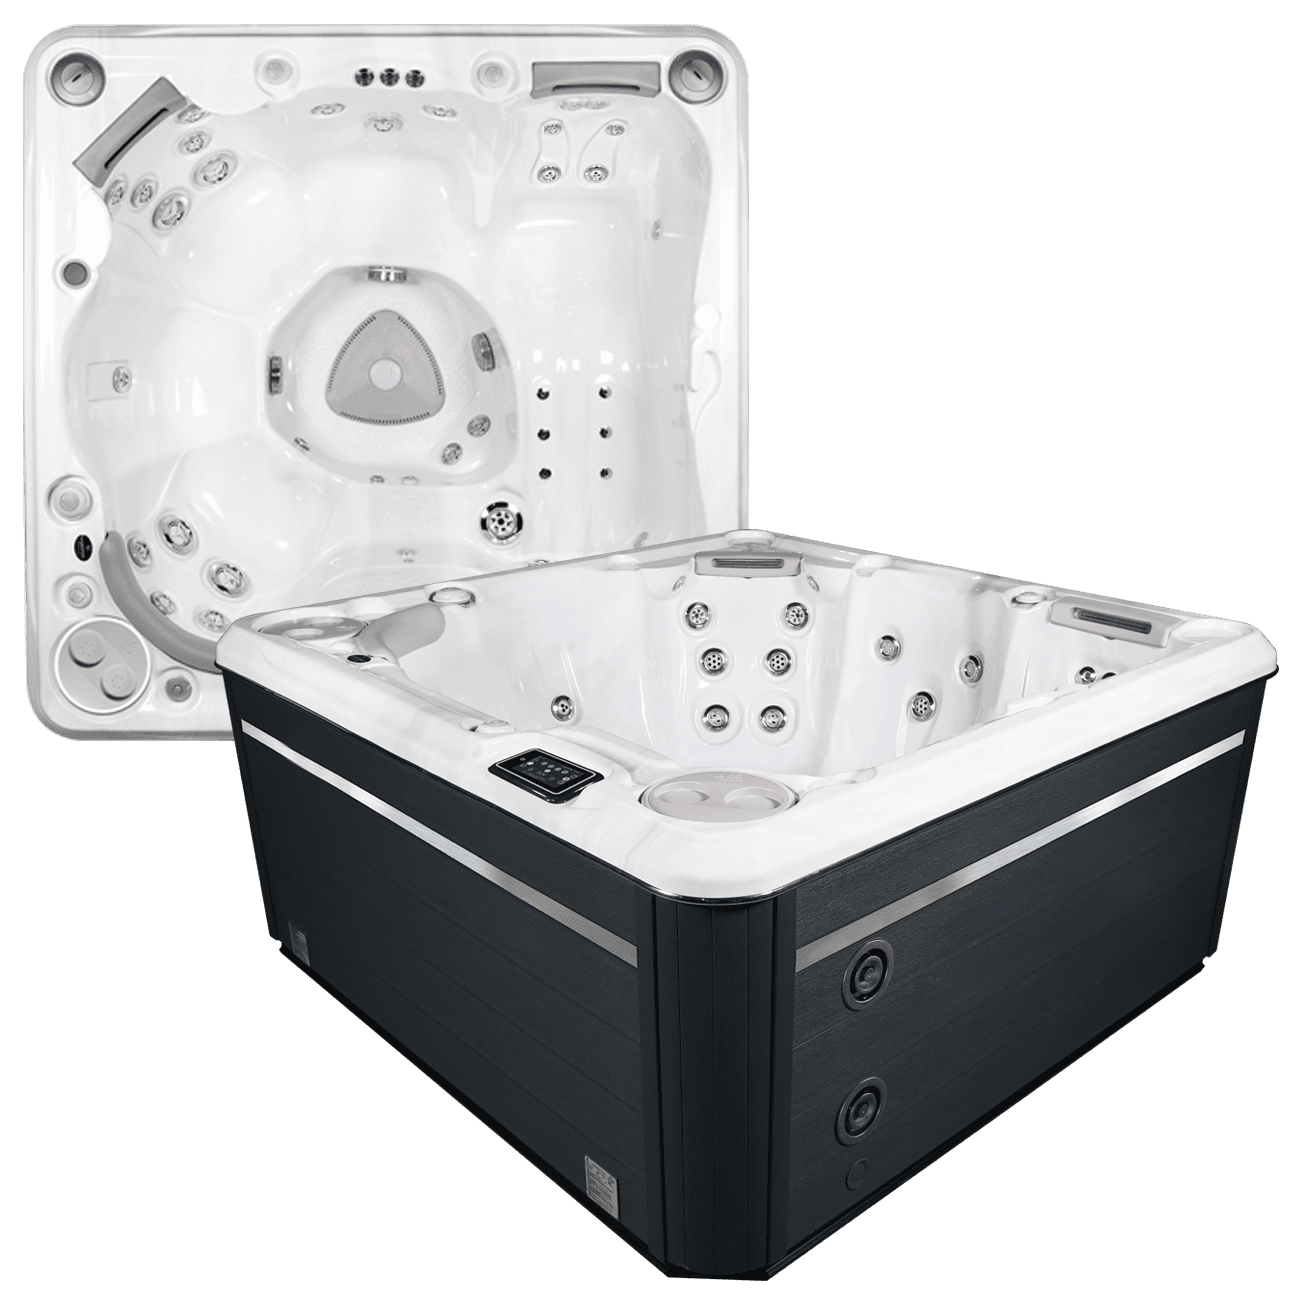 HP20-2020-Self-Cleaning-570-Gold-Hot-Tub-1300x1300-Image-FNL